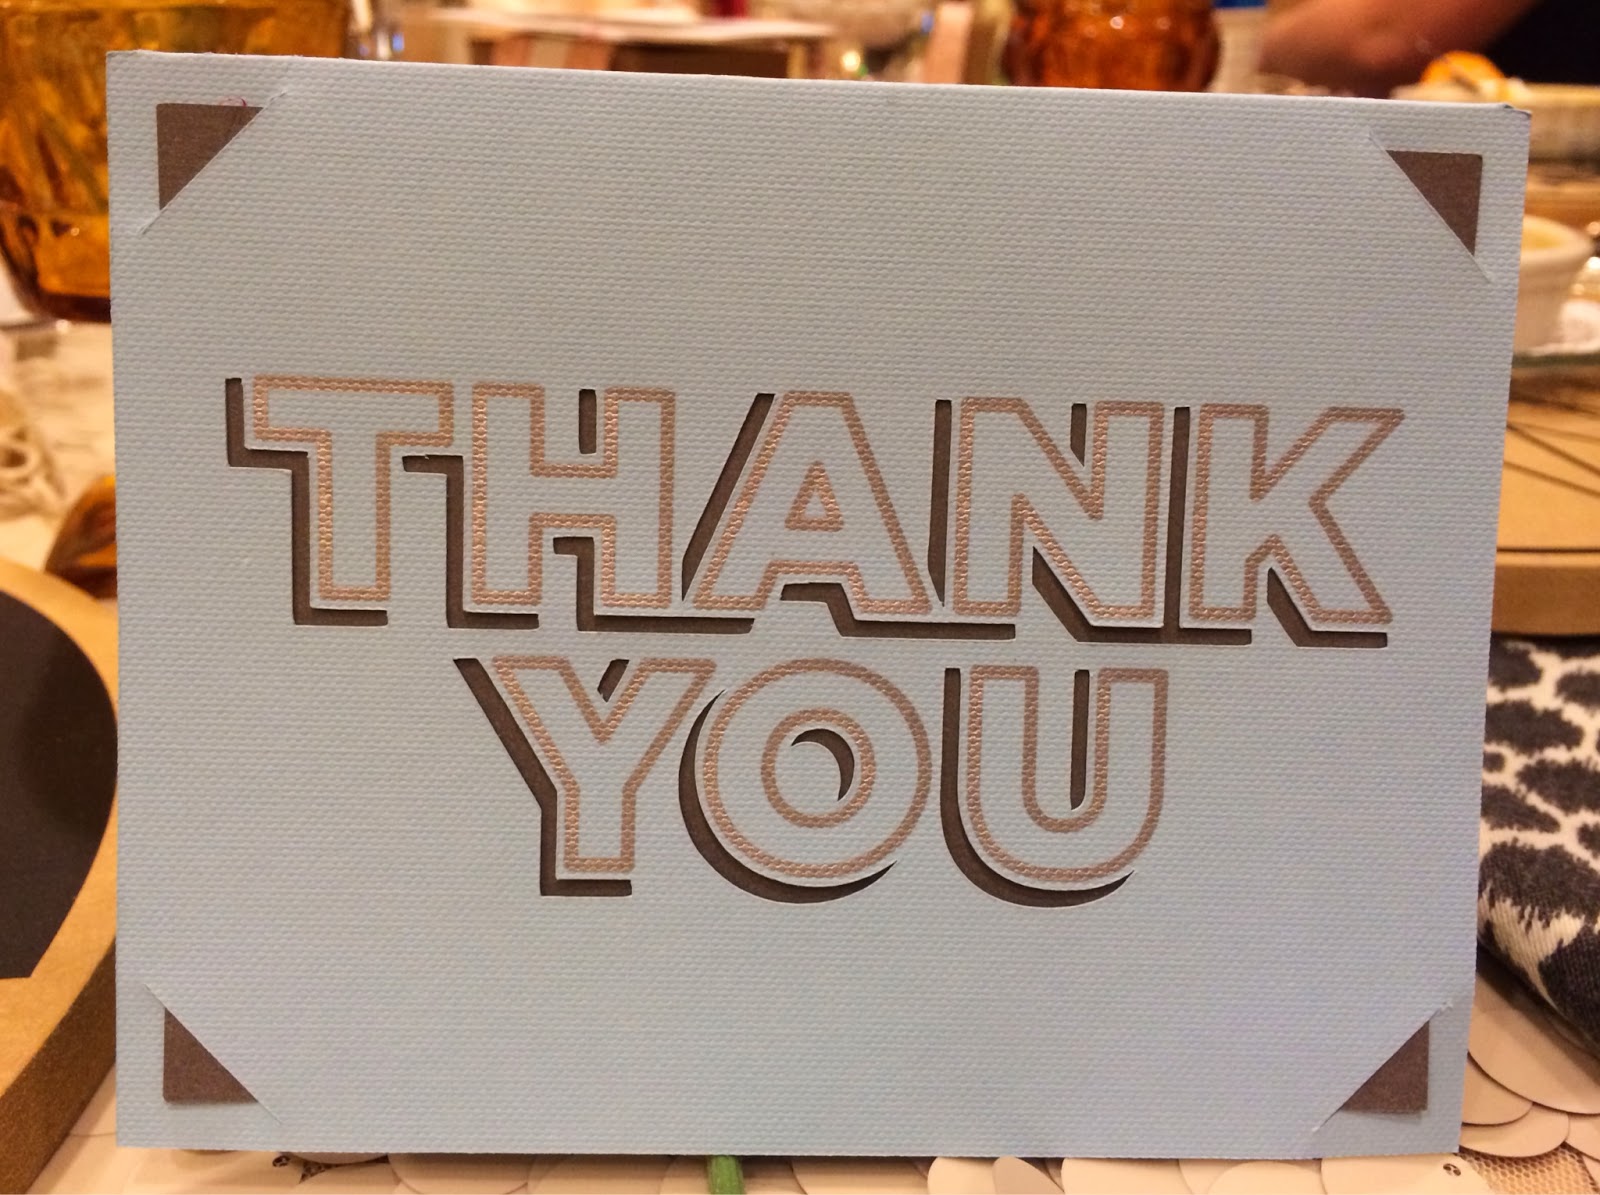 How To Make Thank You Cards Using Your Cricut Machine